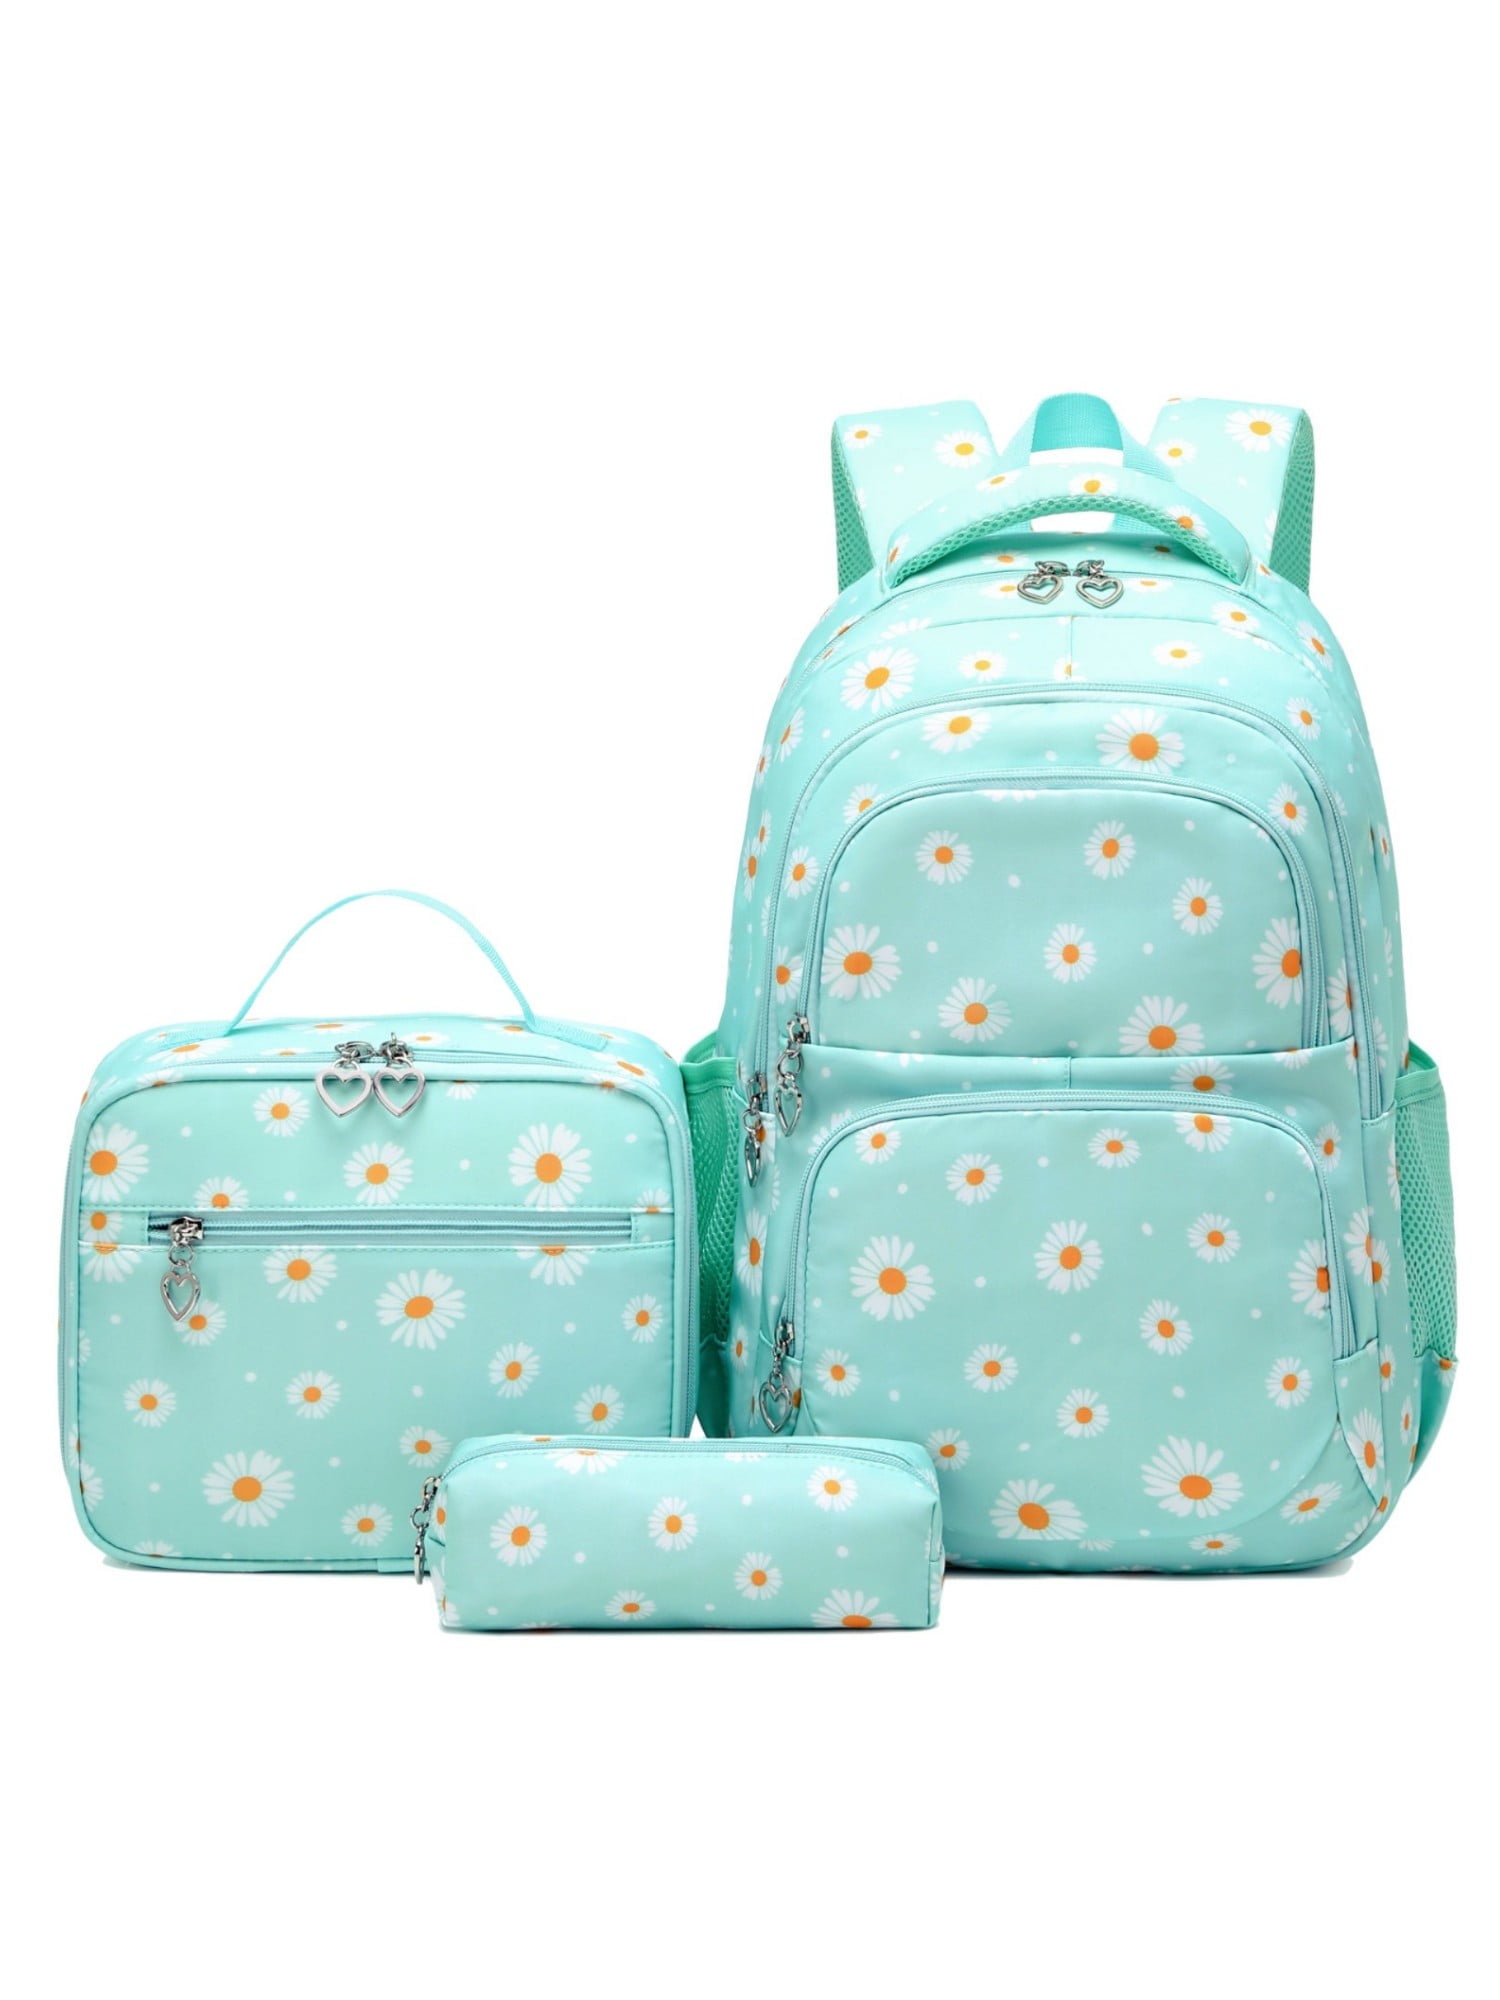 Forestfish Green Daisy Kids School Backpacks Set for Teen Girls with Lunch Bag ,Waterproof Lightweight Large Books Bag for Middle School, Girl's, Size